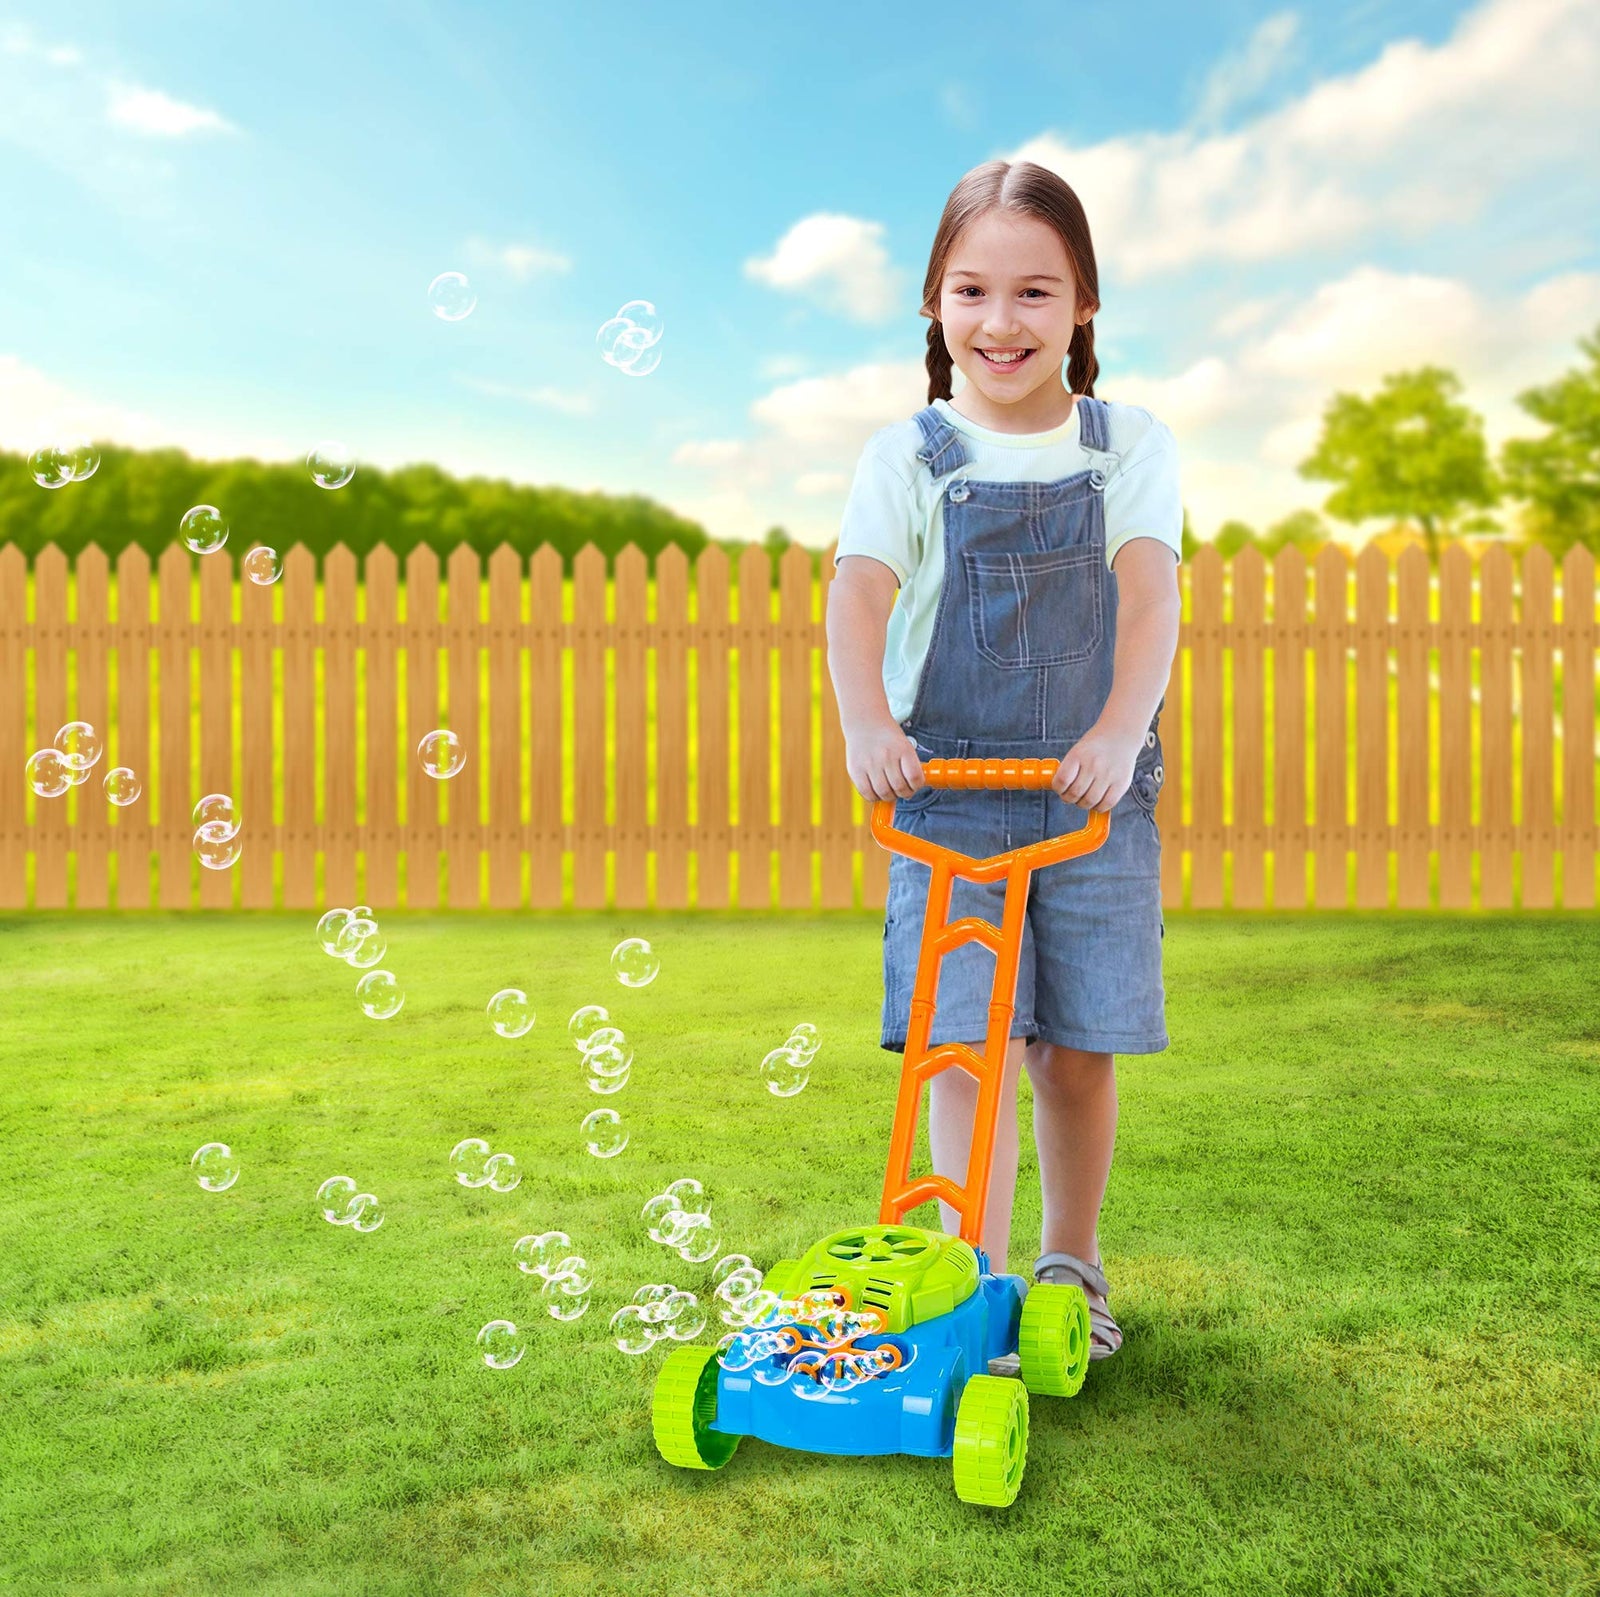 ArtCreativity Bubble Lawn Mower - Electronic Bubble Blower Machine - Fun Bubbles Blowing Push Toys for Kids - Bubble Solution Included - Birthday Gift for Boys, Girls, Toddlers